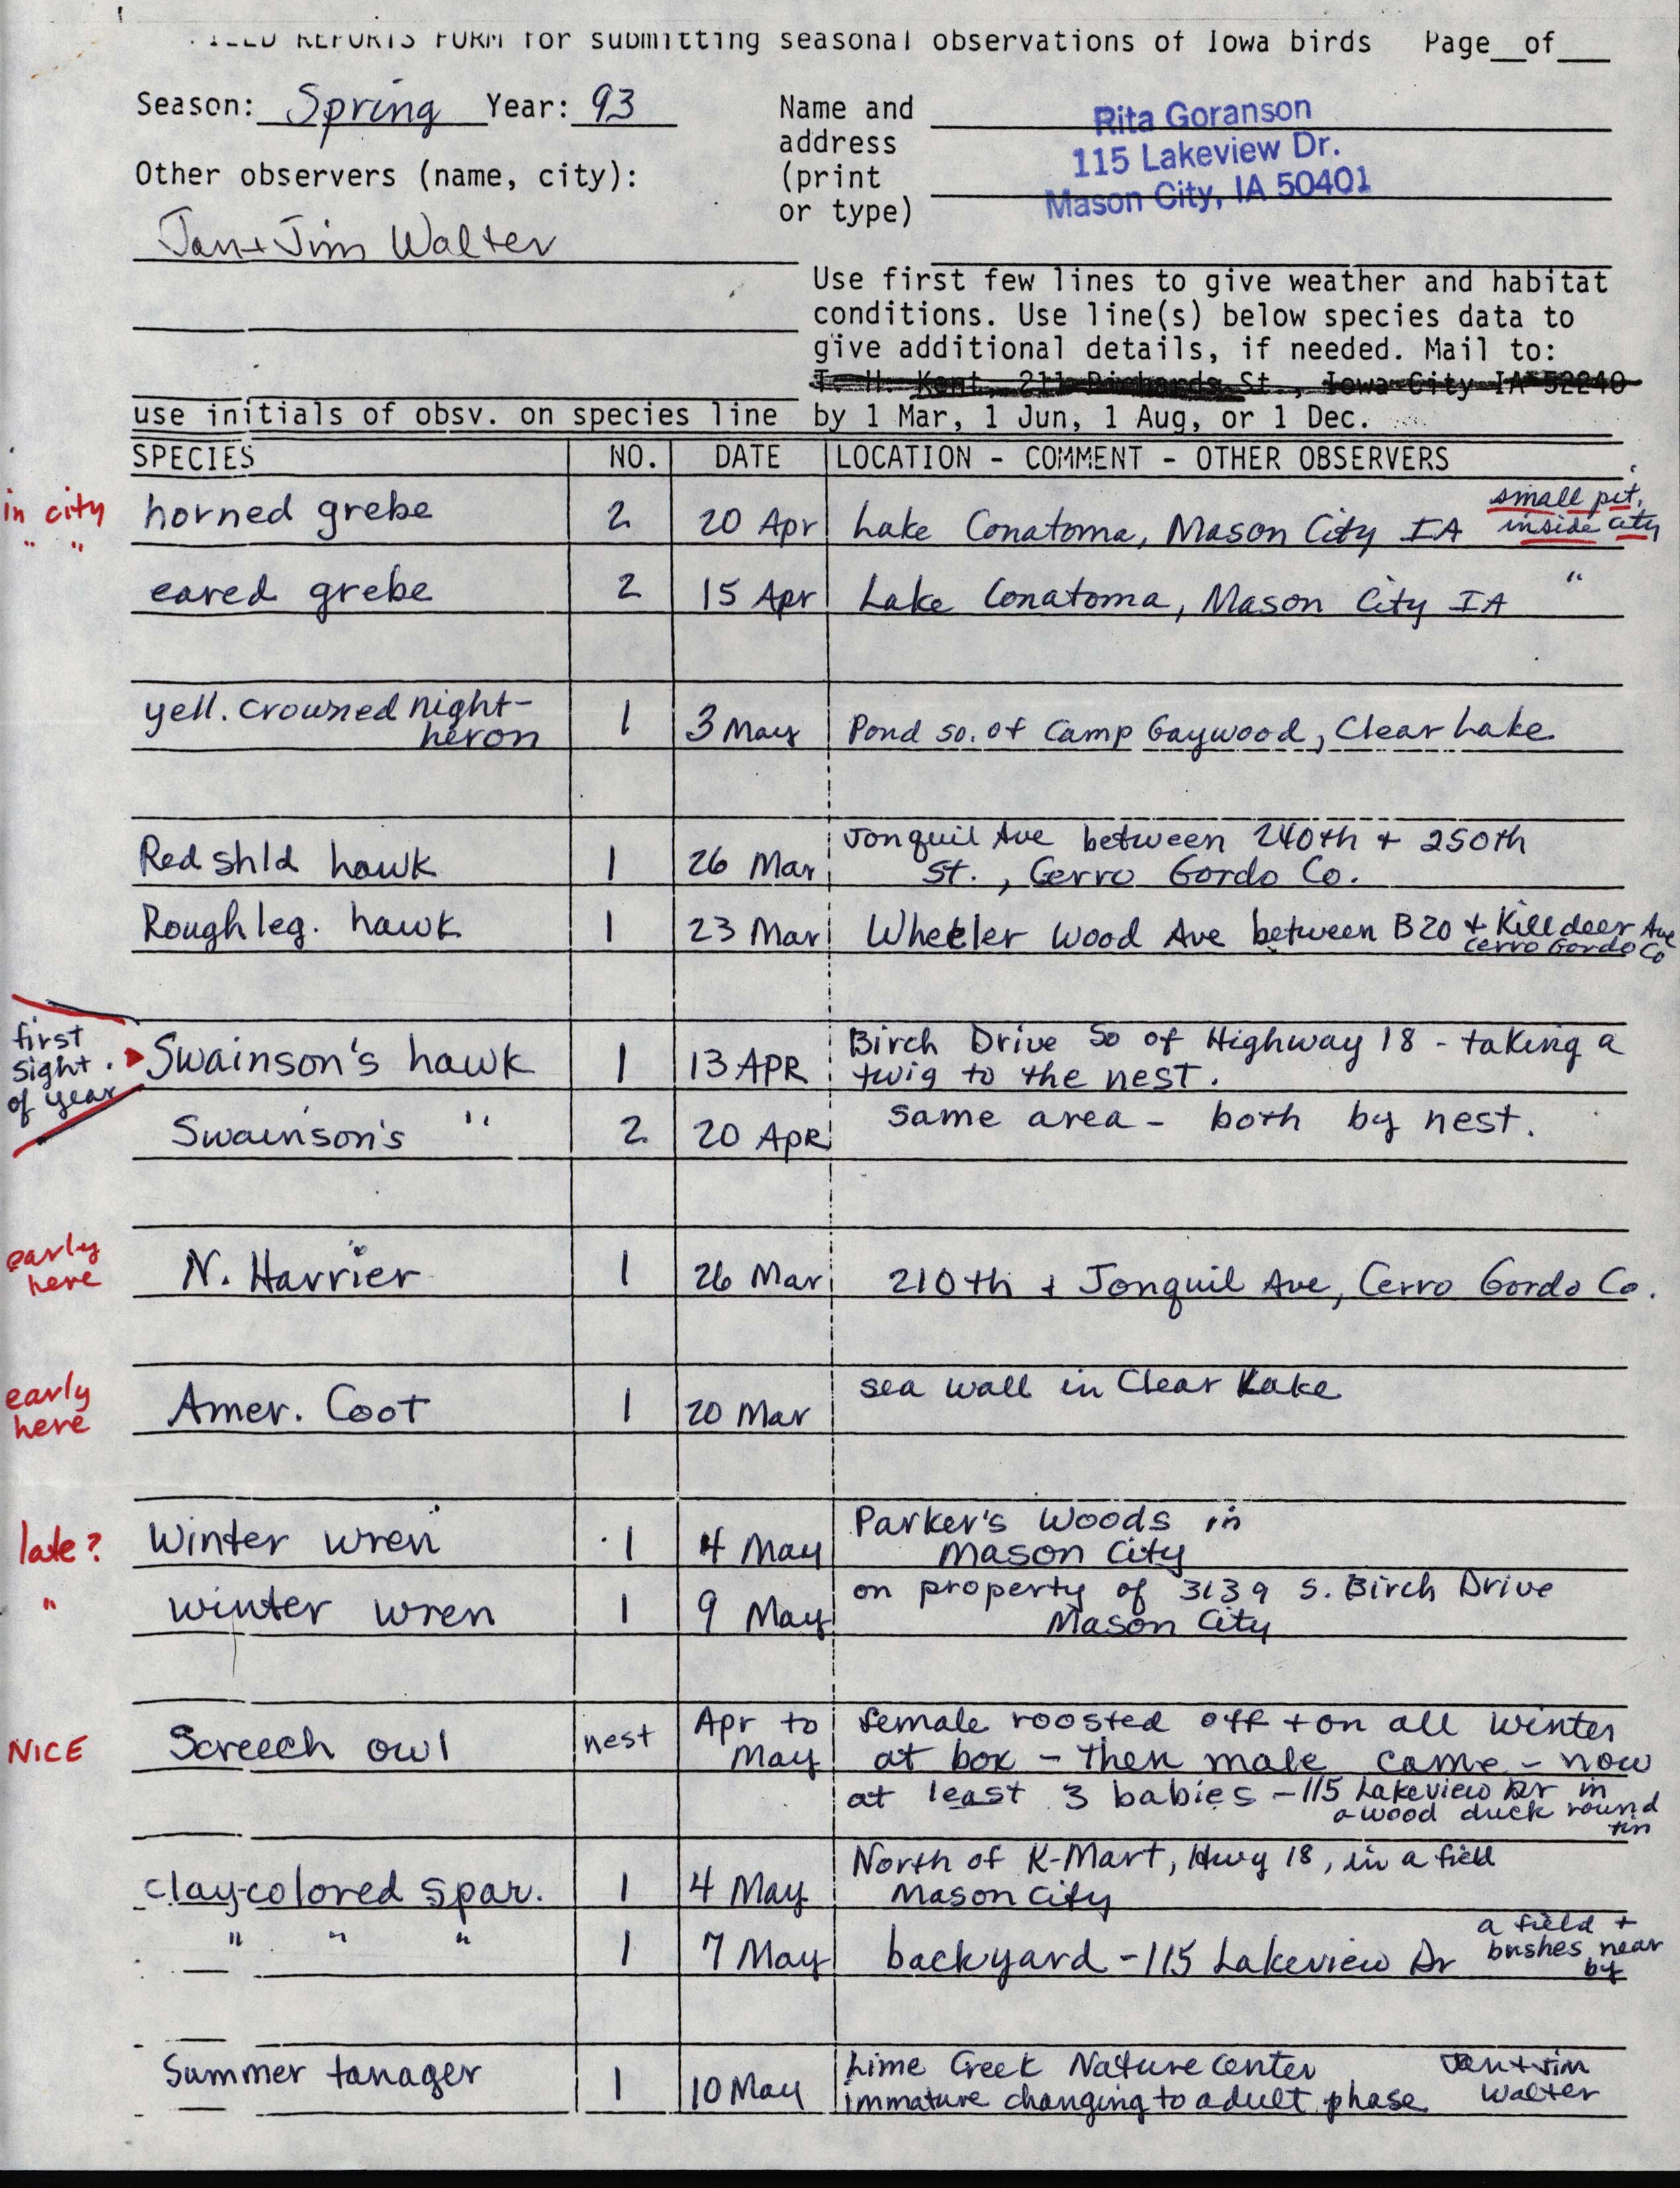 Field reports form for submitting seasonal observations of Iowa birds, Rita Goranson, Spring 1993